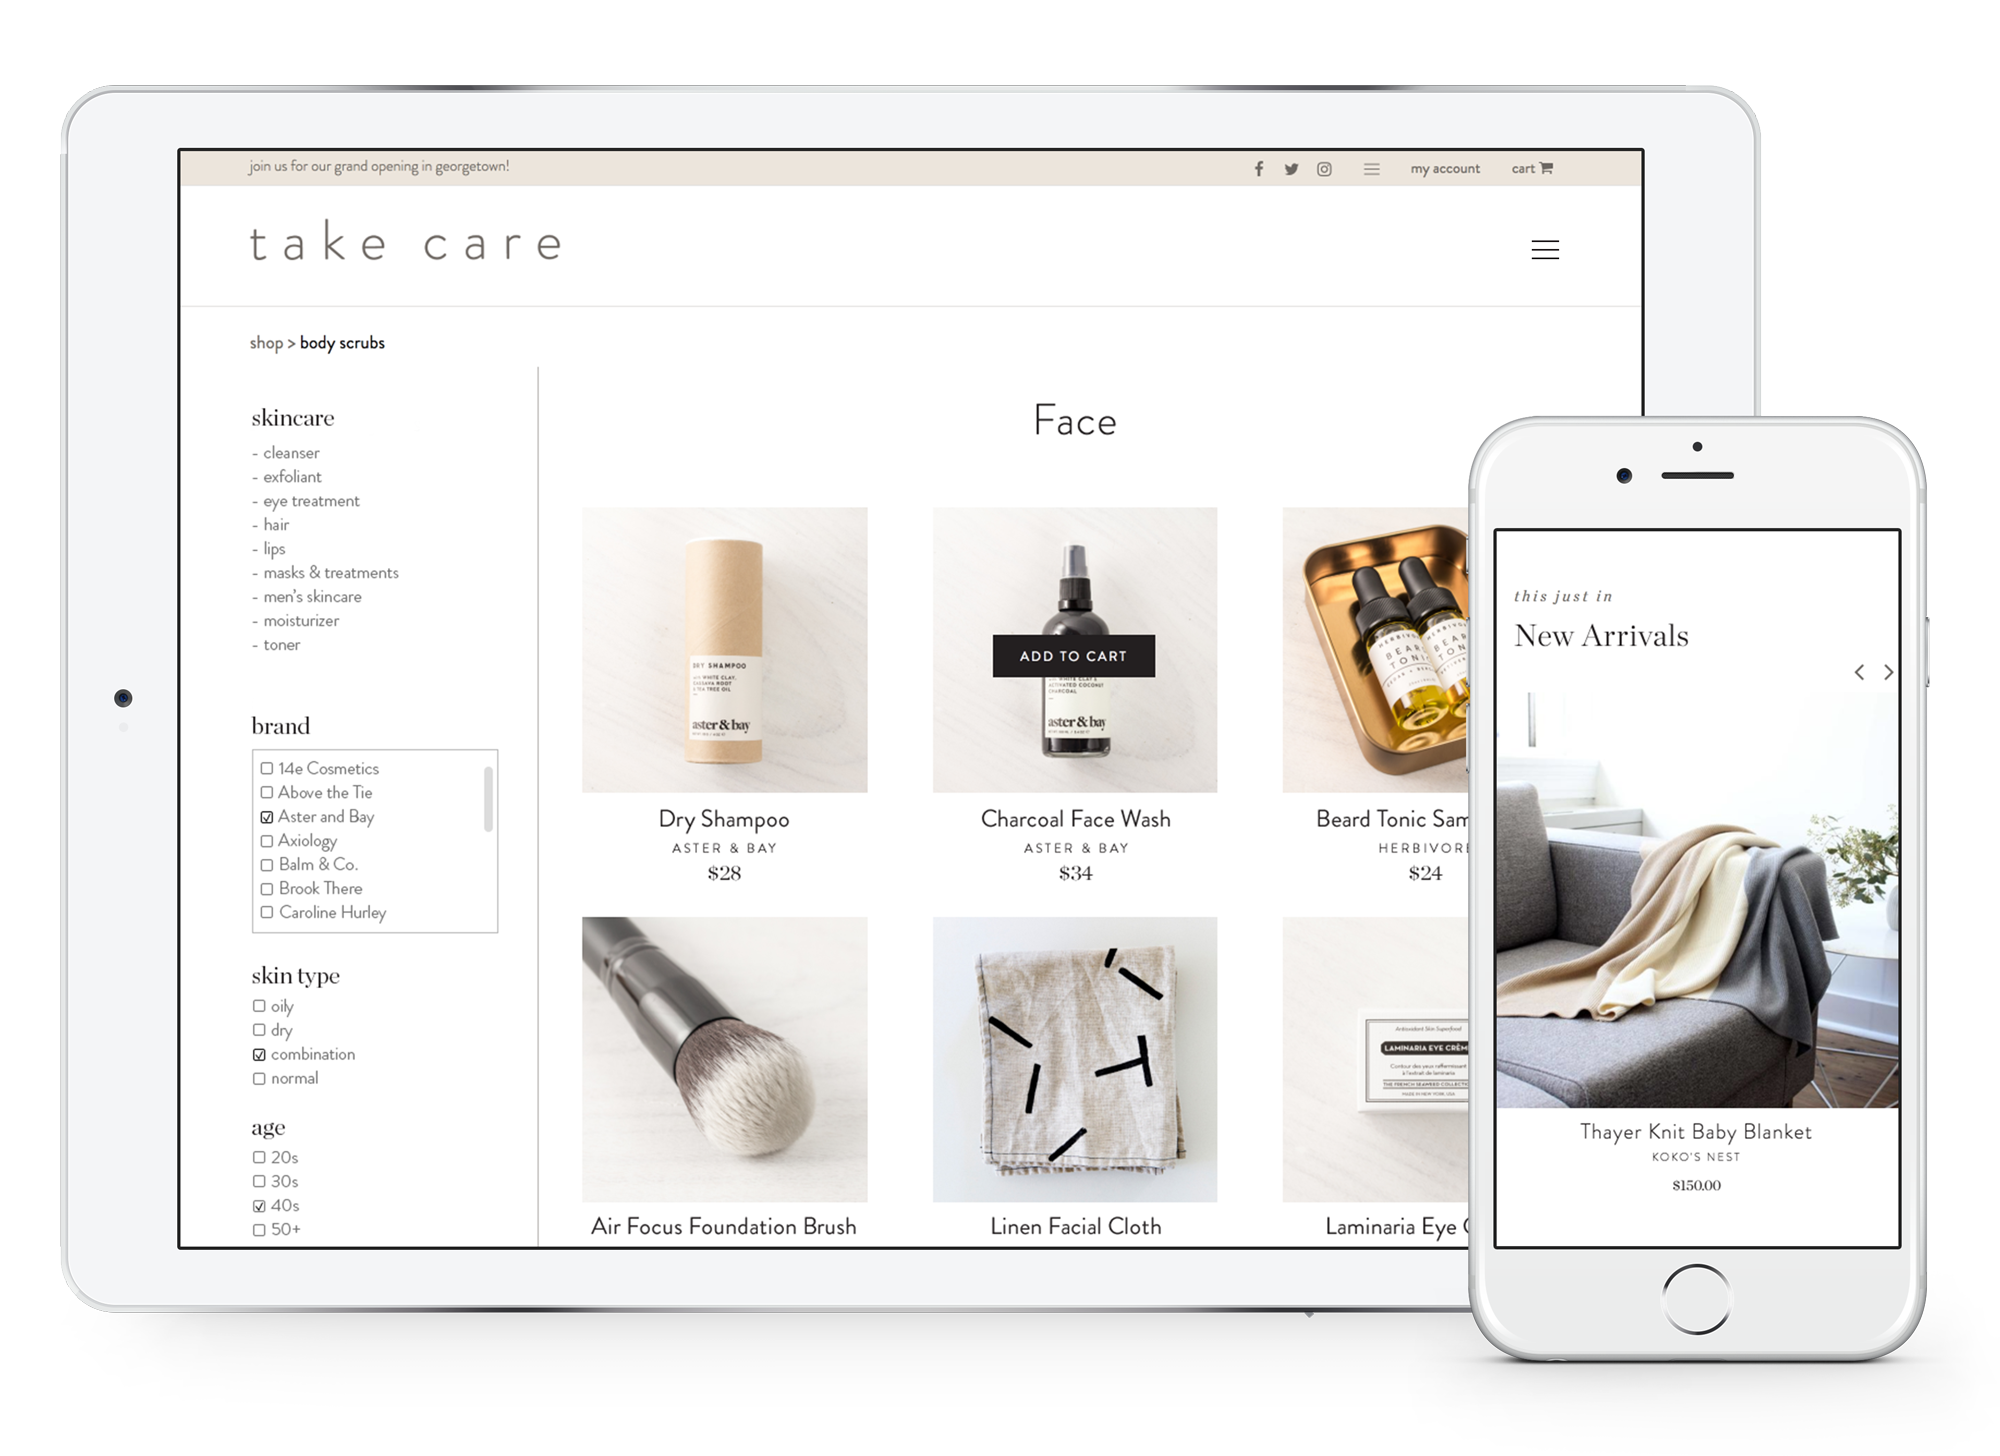 eCommerce retails website showing products